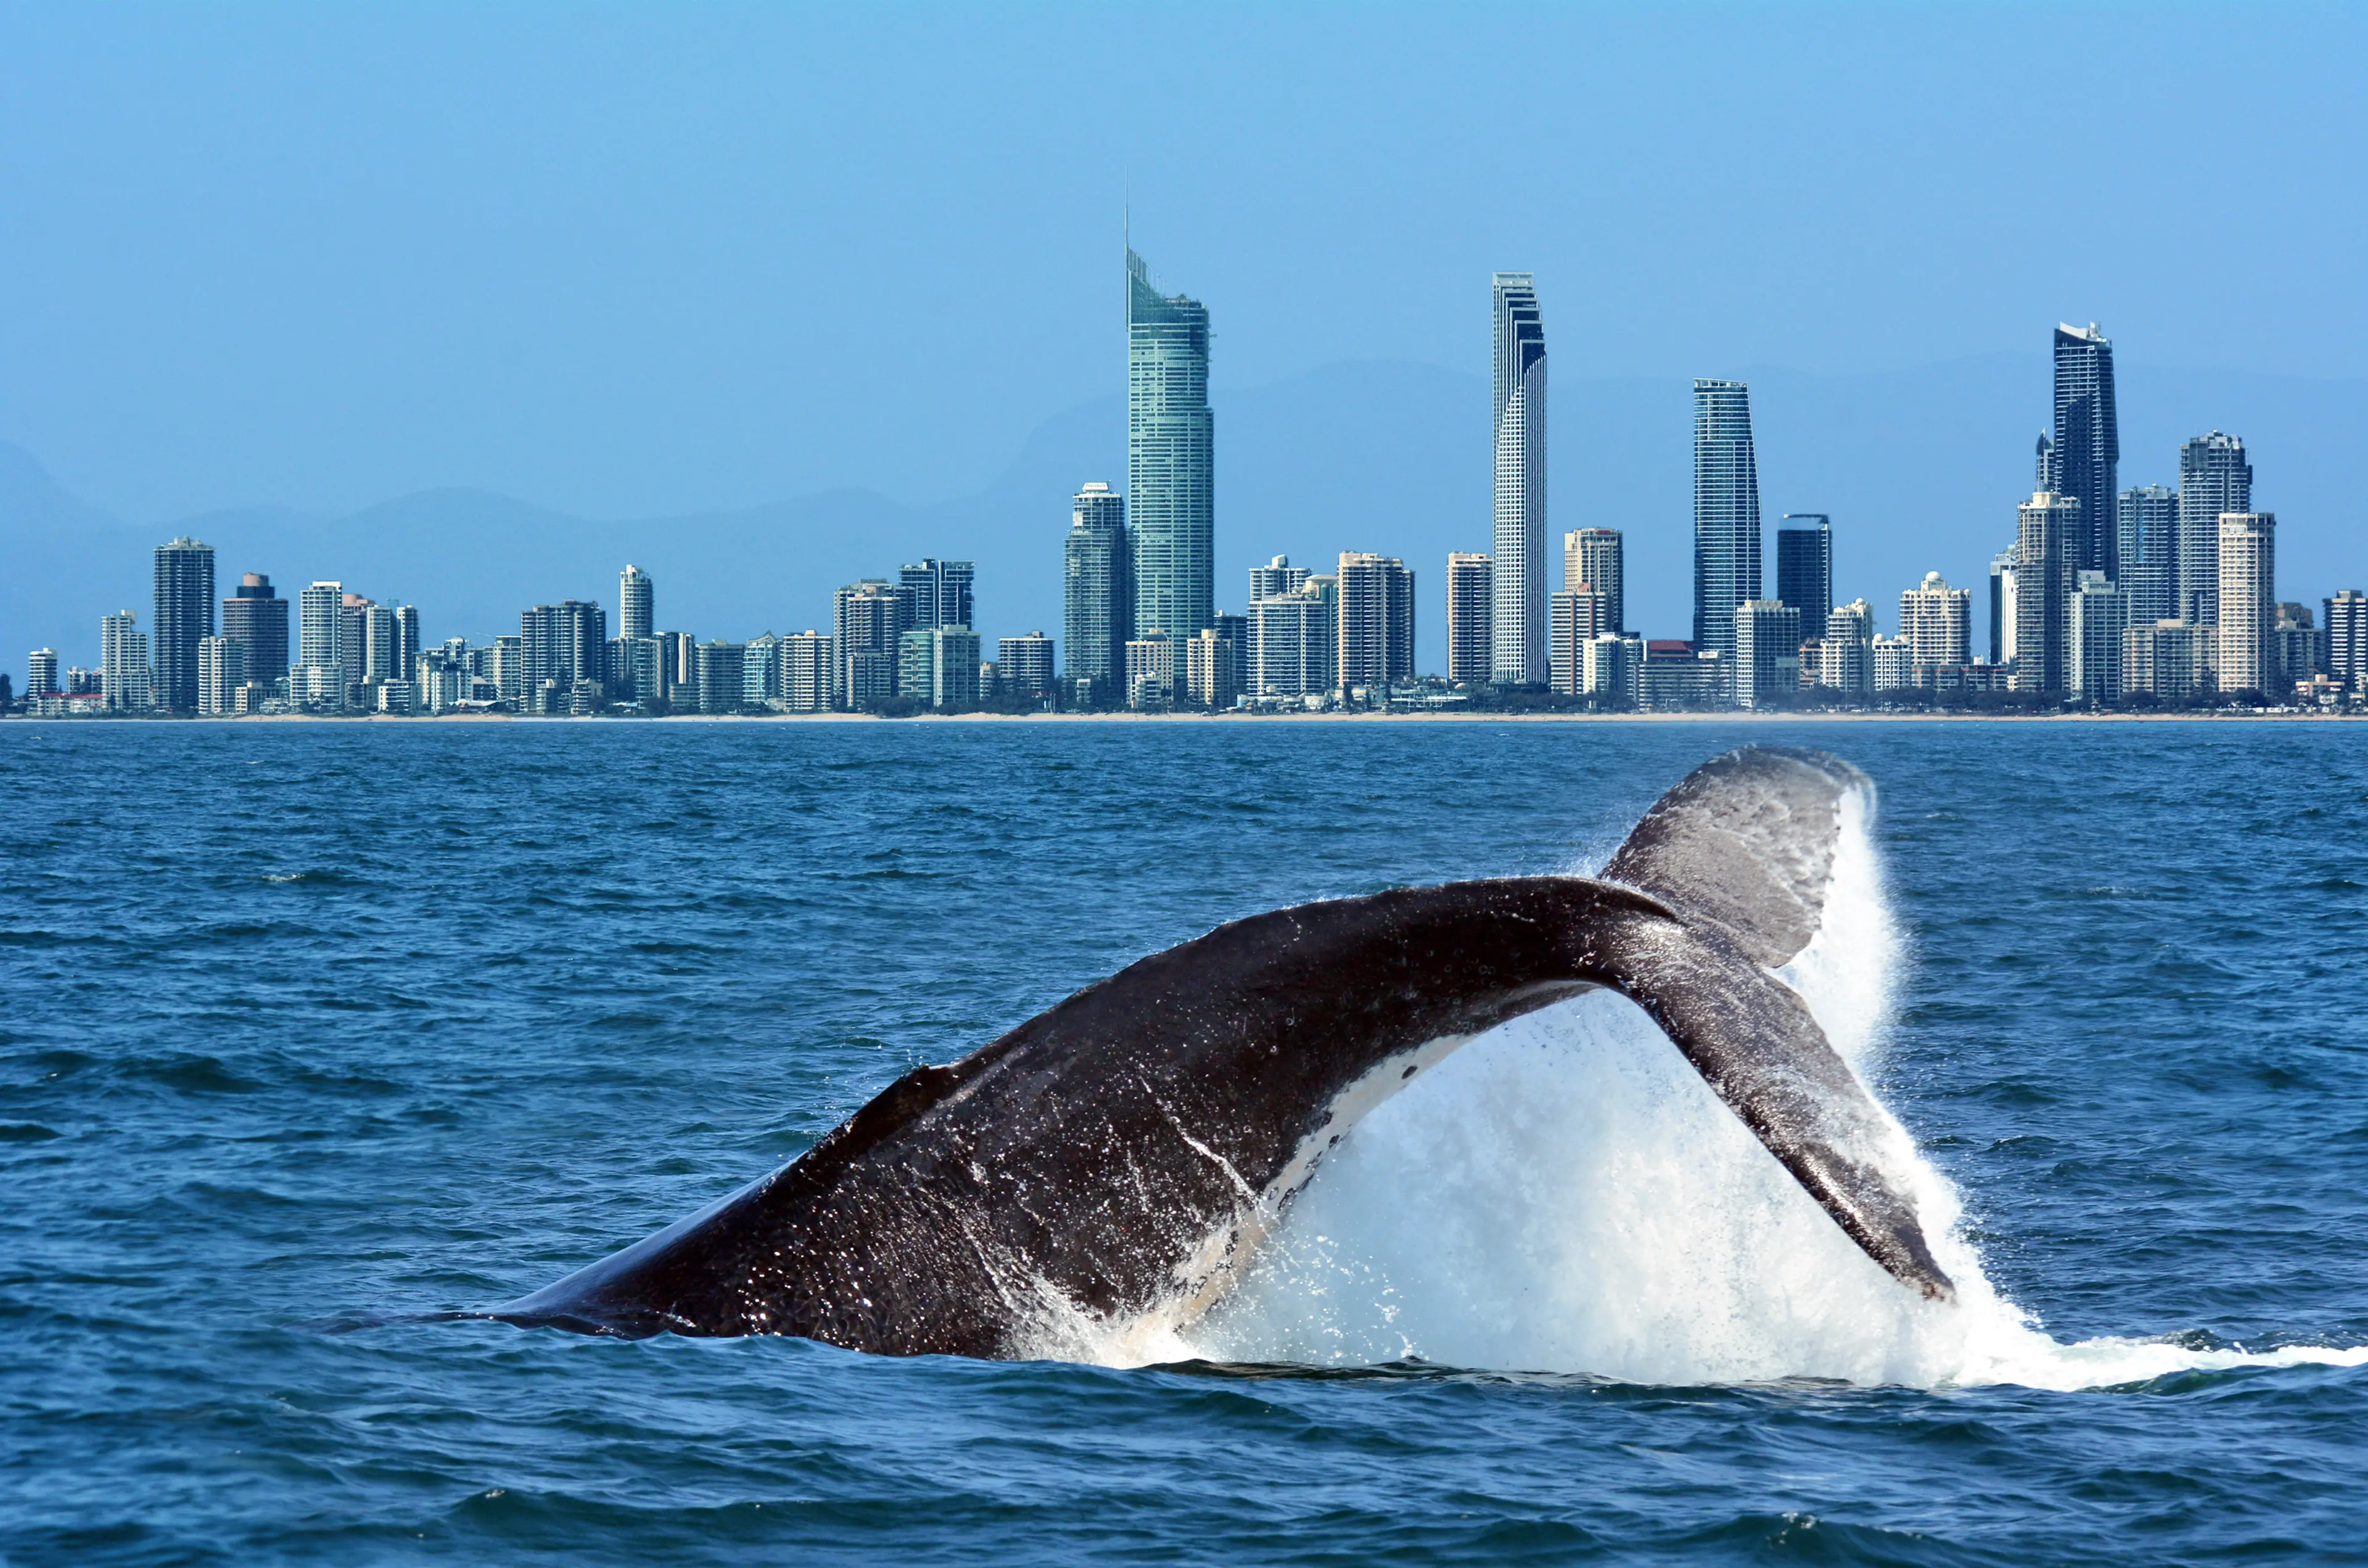 3-Day Solo Food, Wine, Shopping & Sightseeing Adventure in Gold Coast